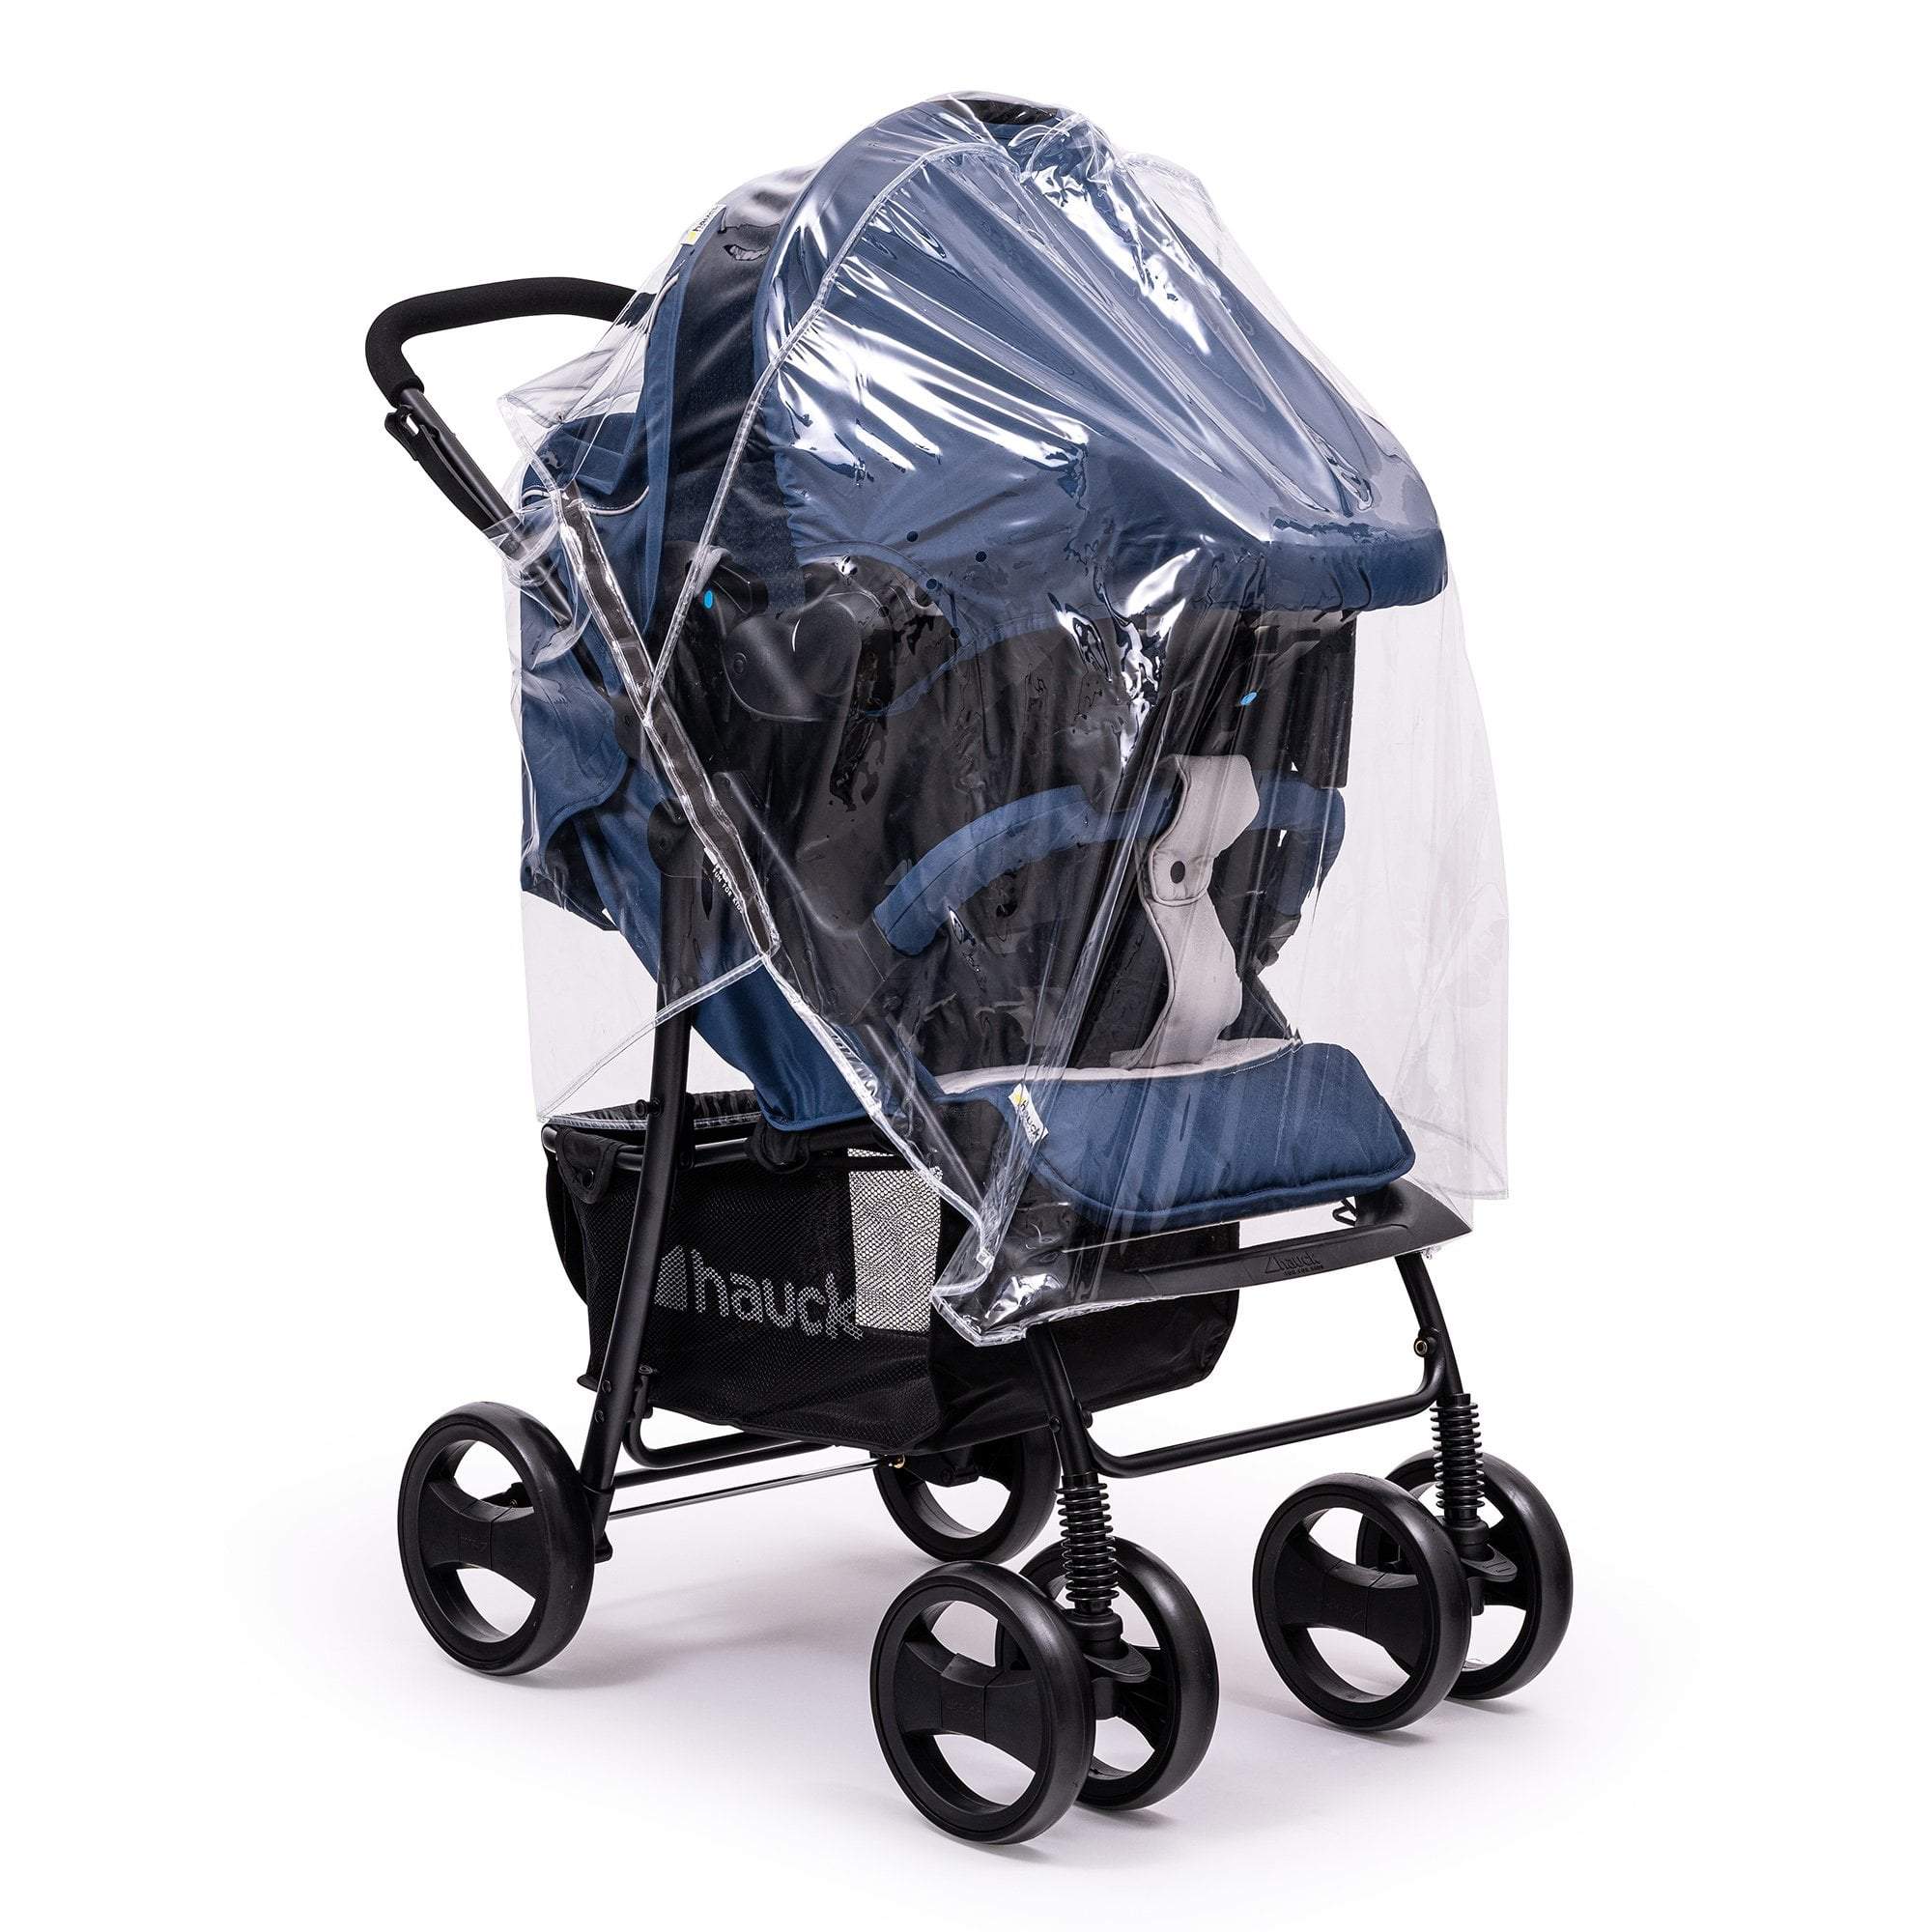 Travel System Raincover Compatible with Kiddy - Fits All Models - For Your Little One